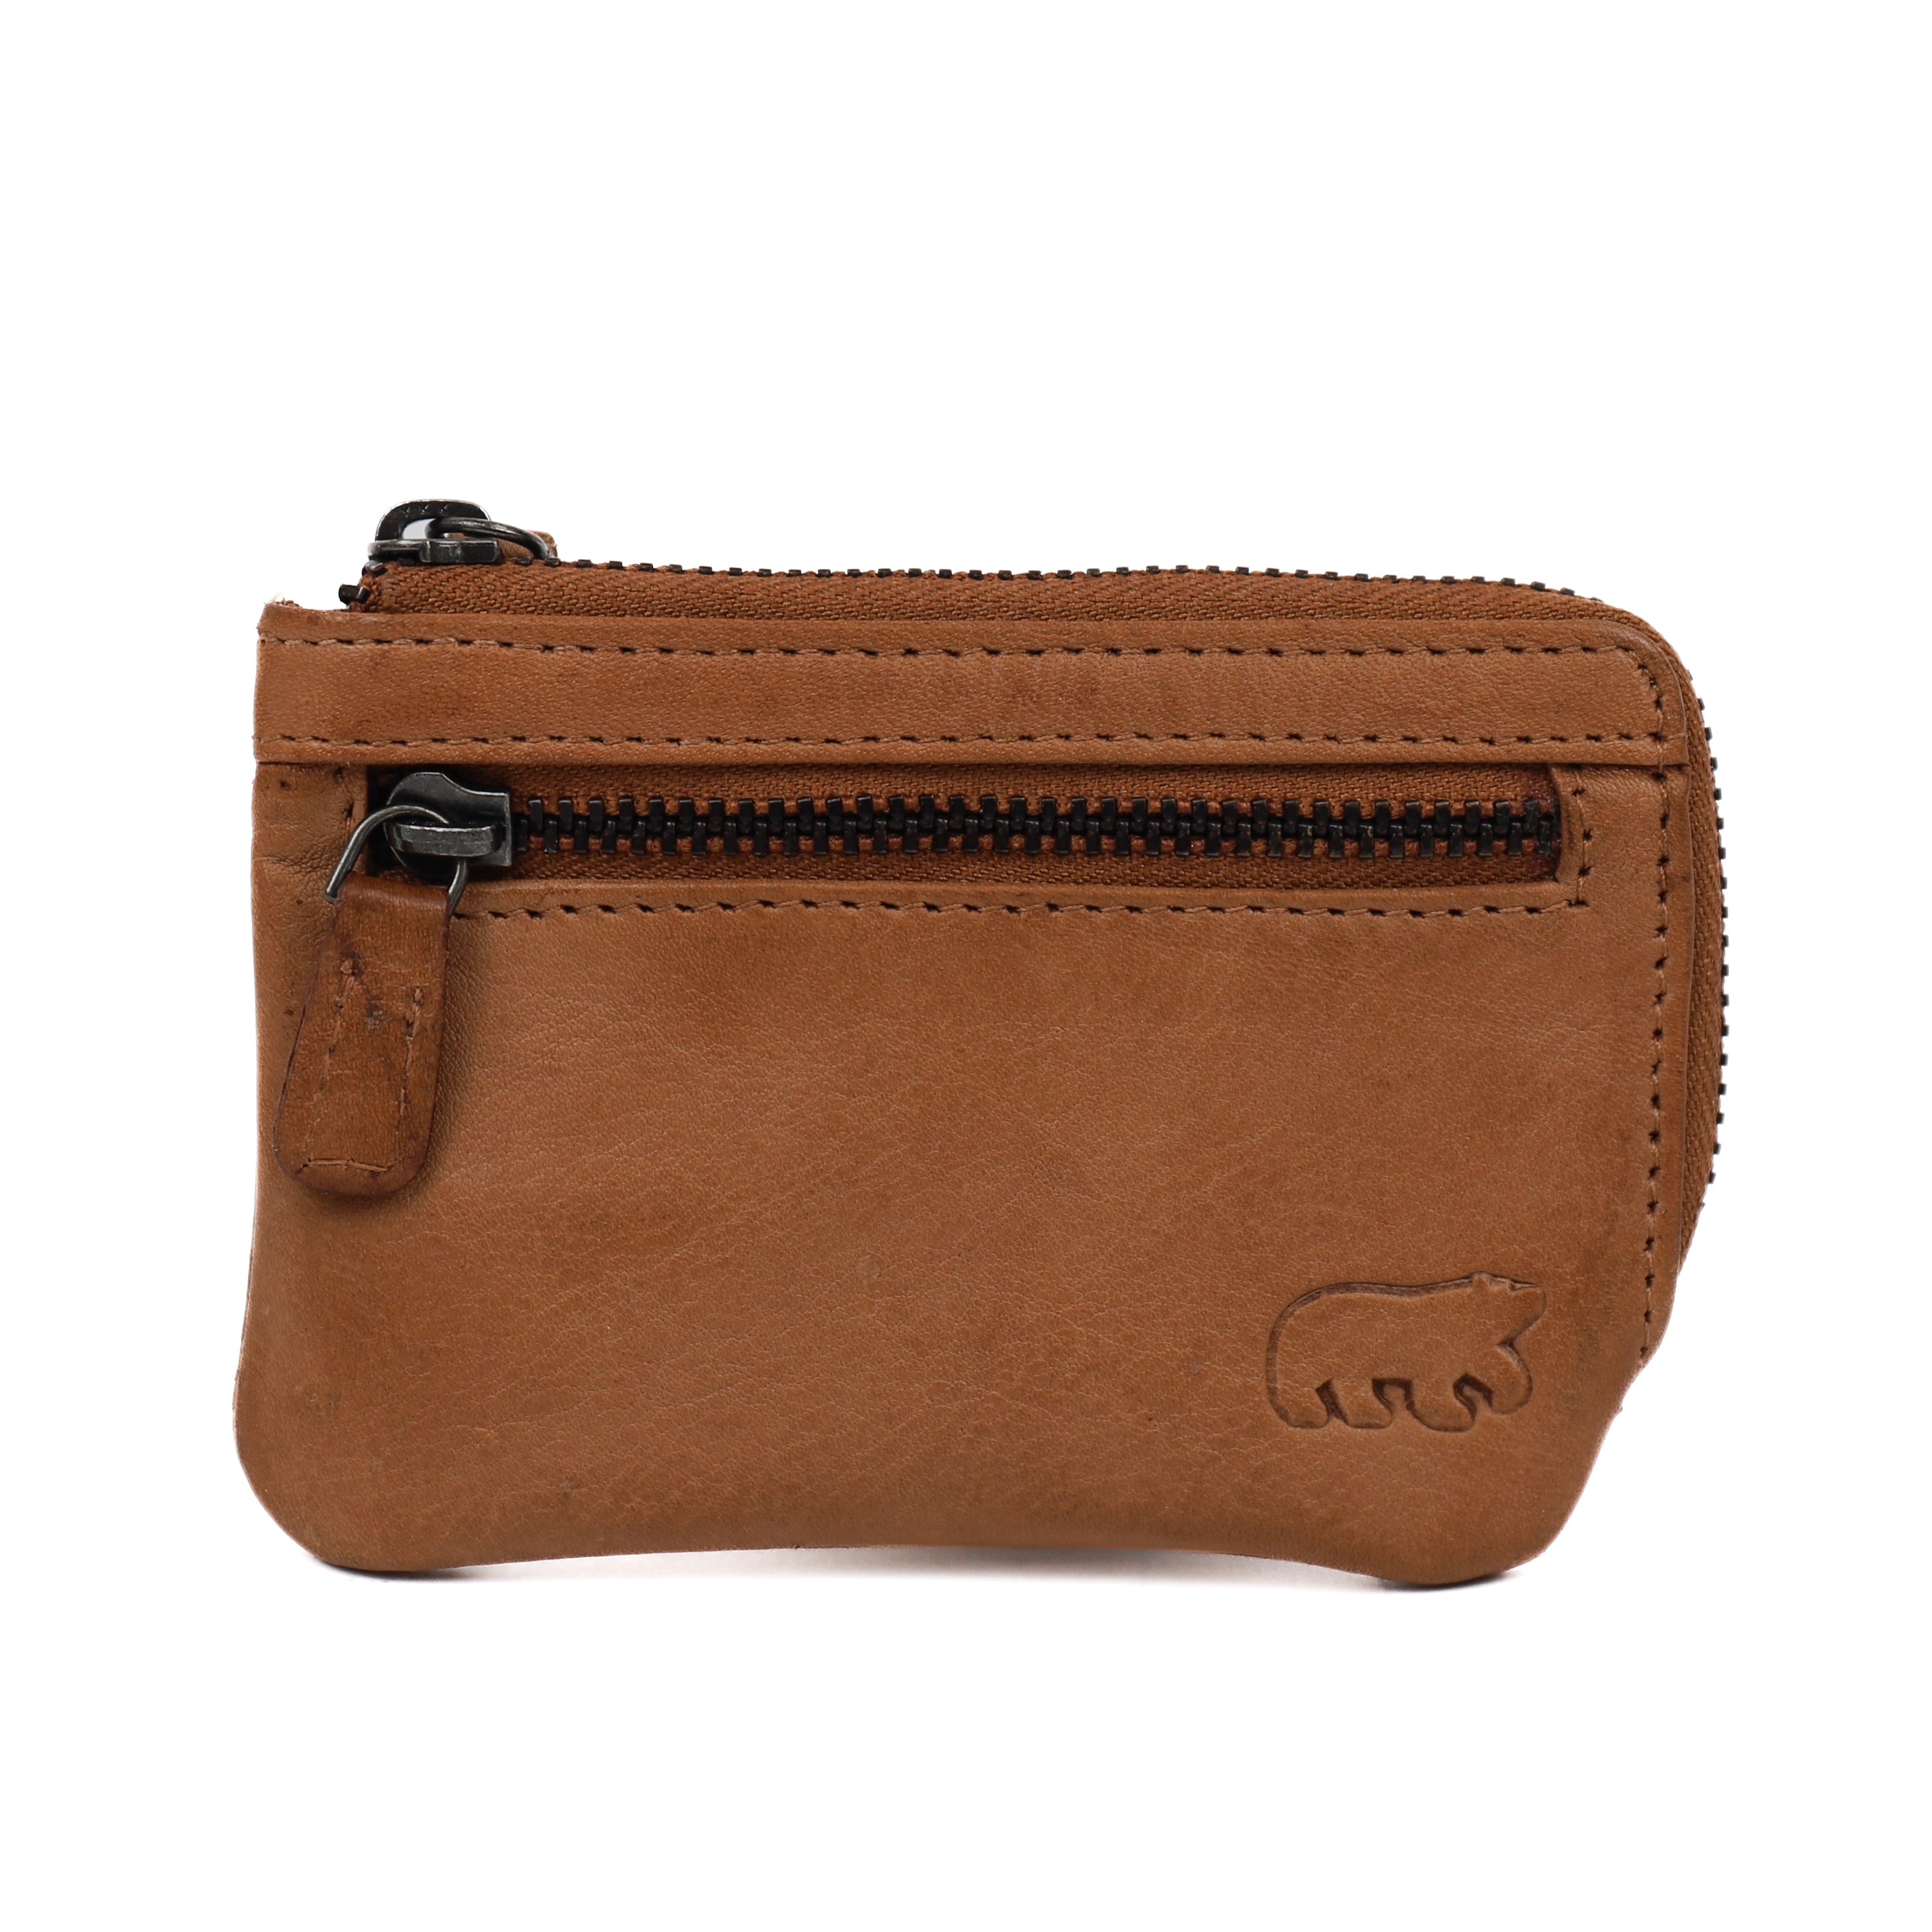 Key pouch 'Lukas' taupe